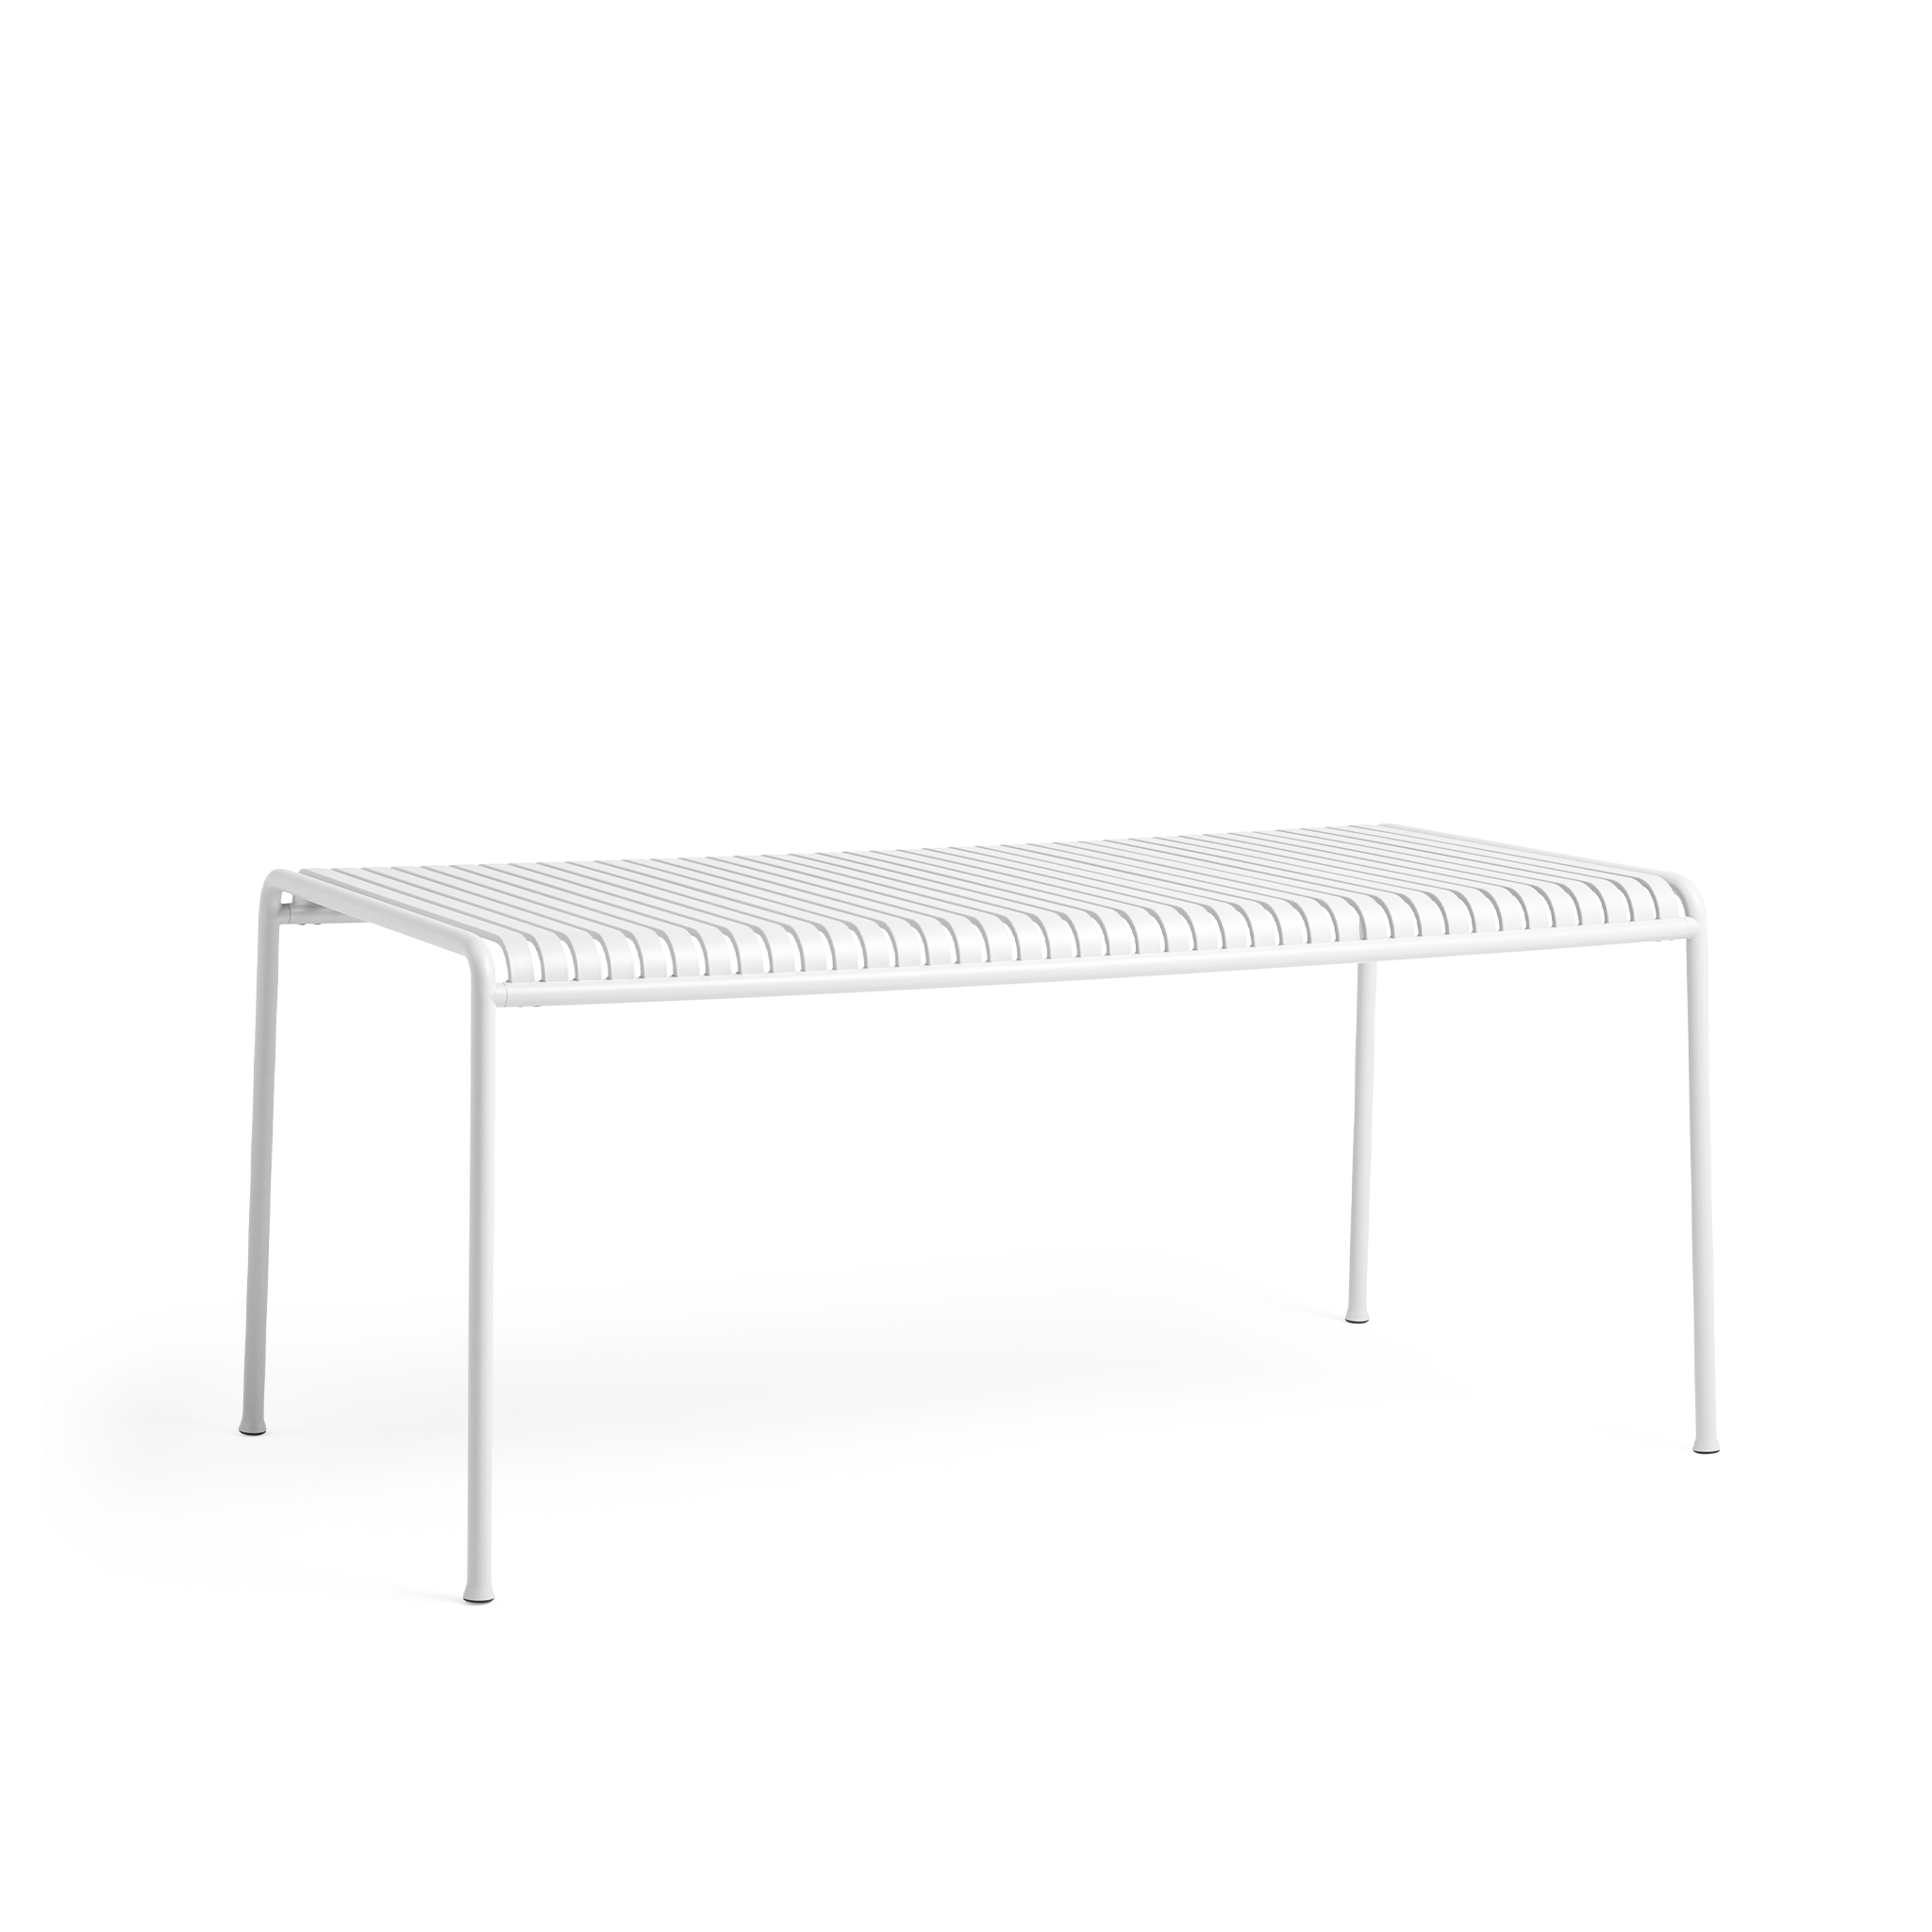 Clearance Palissade Rectangular Dining Table / Cream White By HAY